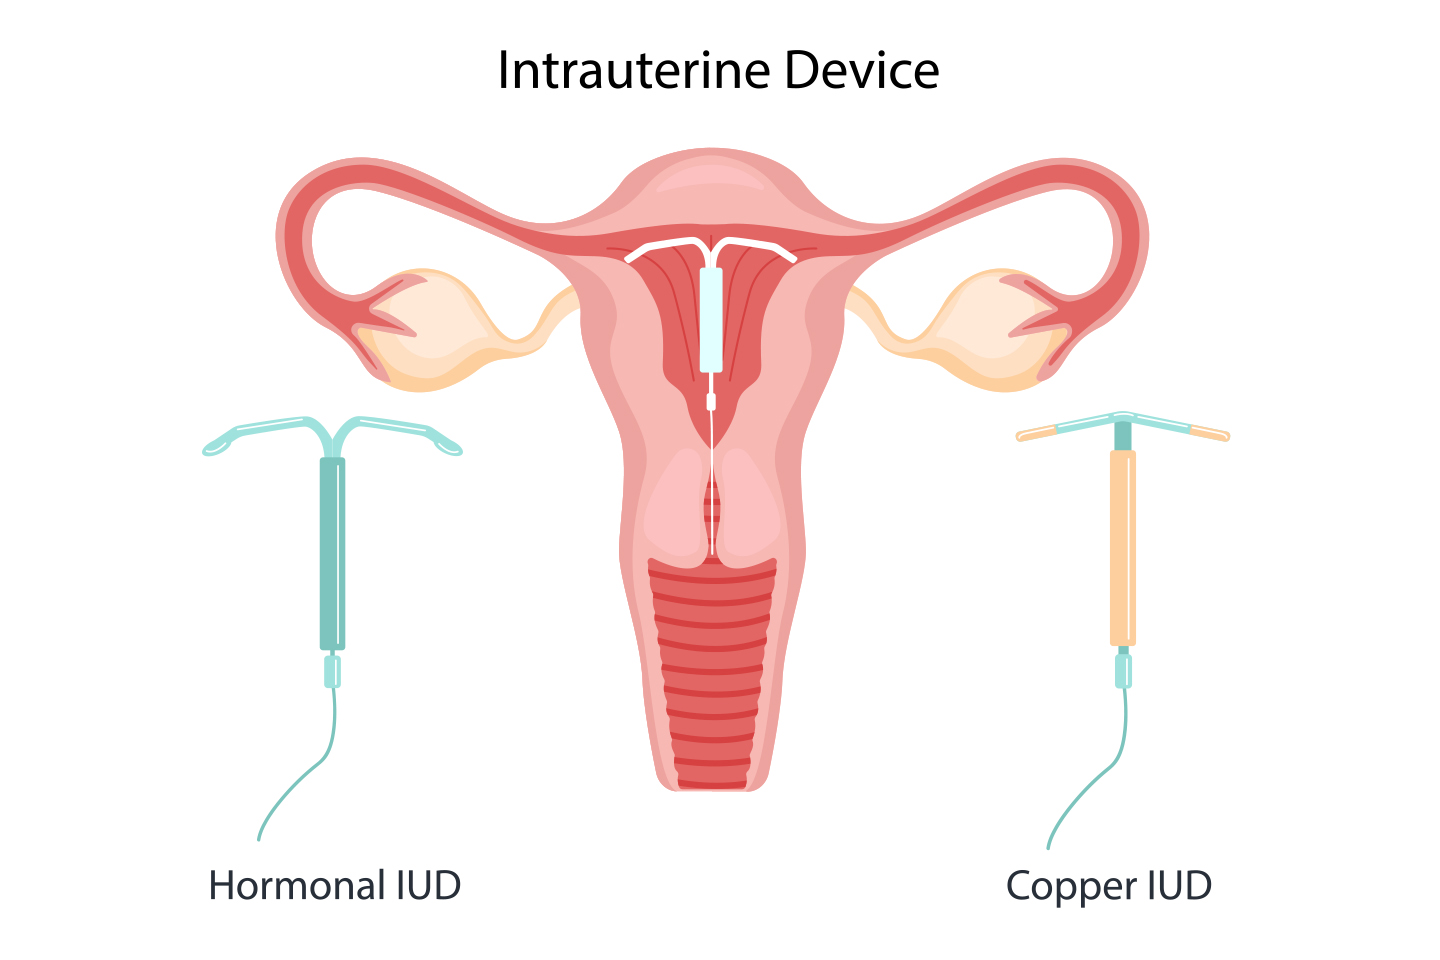 Things to Know About Intrauterine Devices